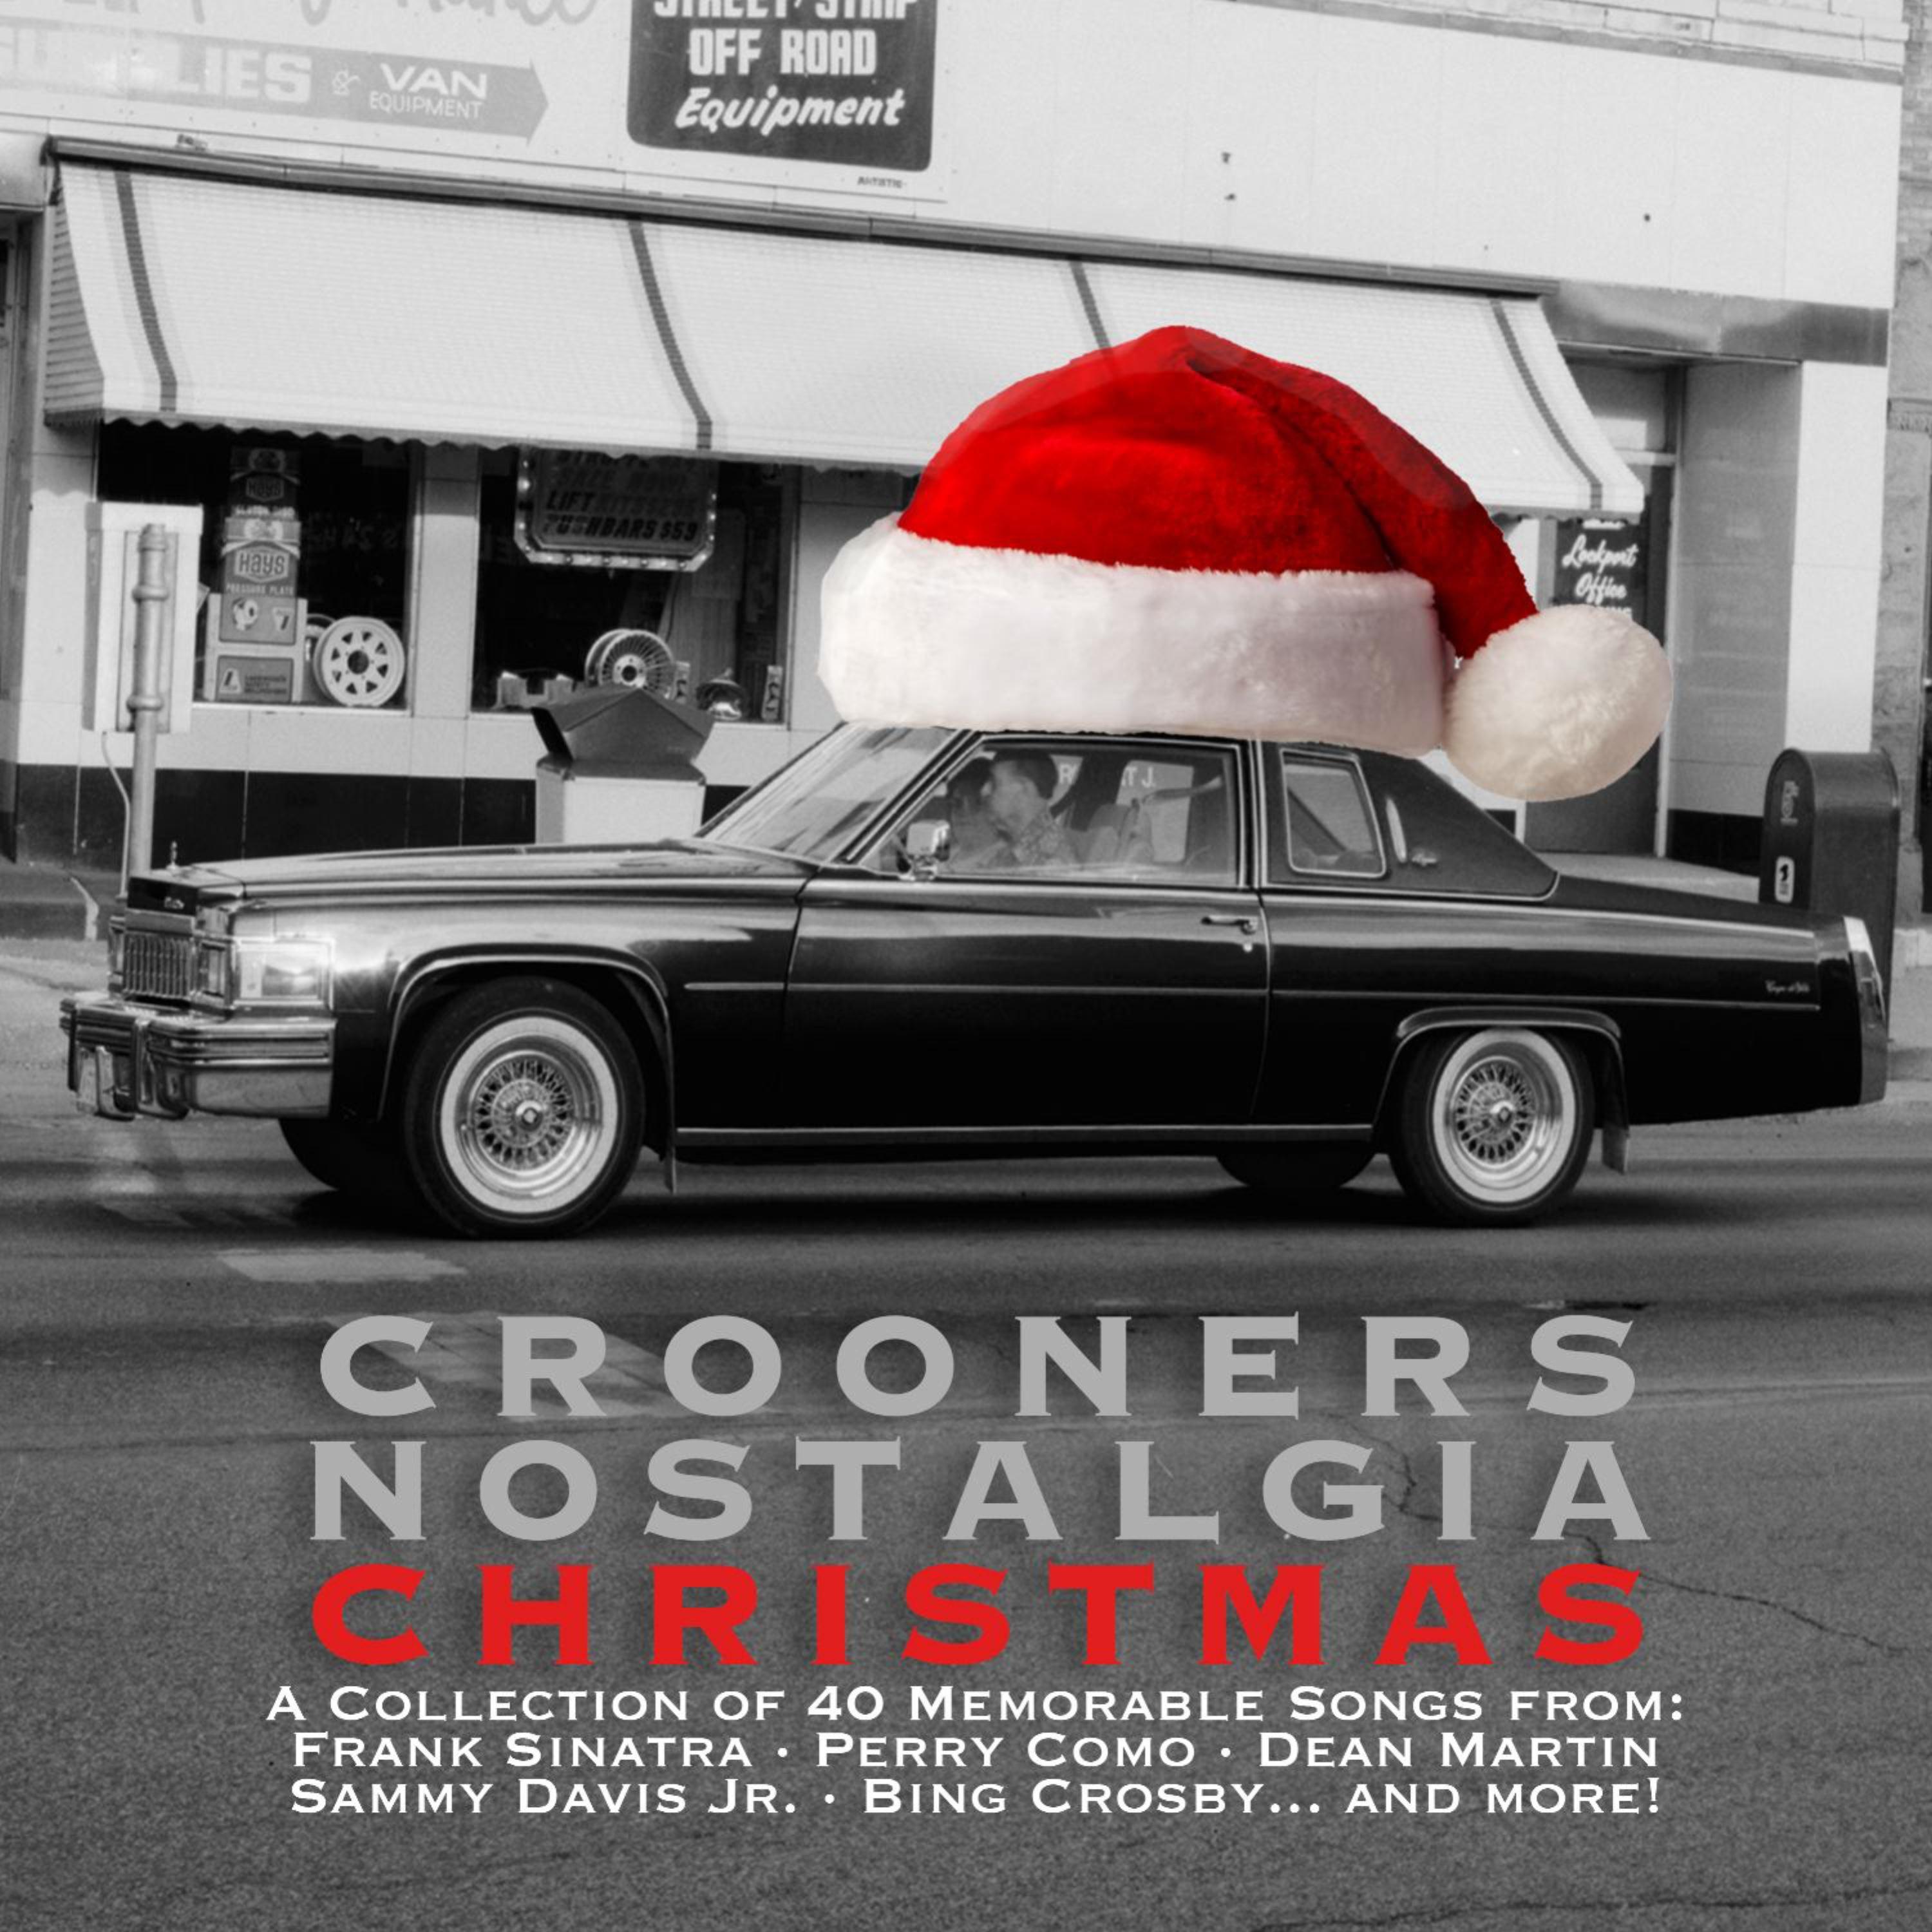 Crooners Nostalgia: Christmas - A Collection of 40 Memorable Christmas Songs (Remastered)